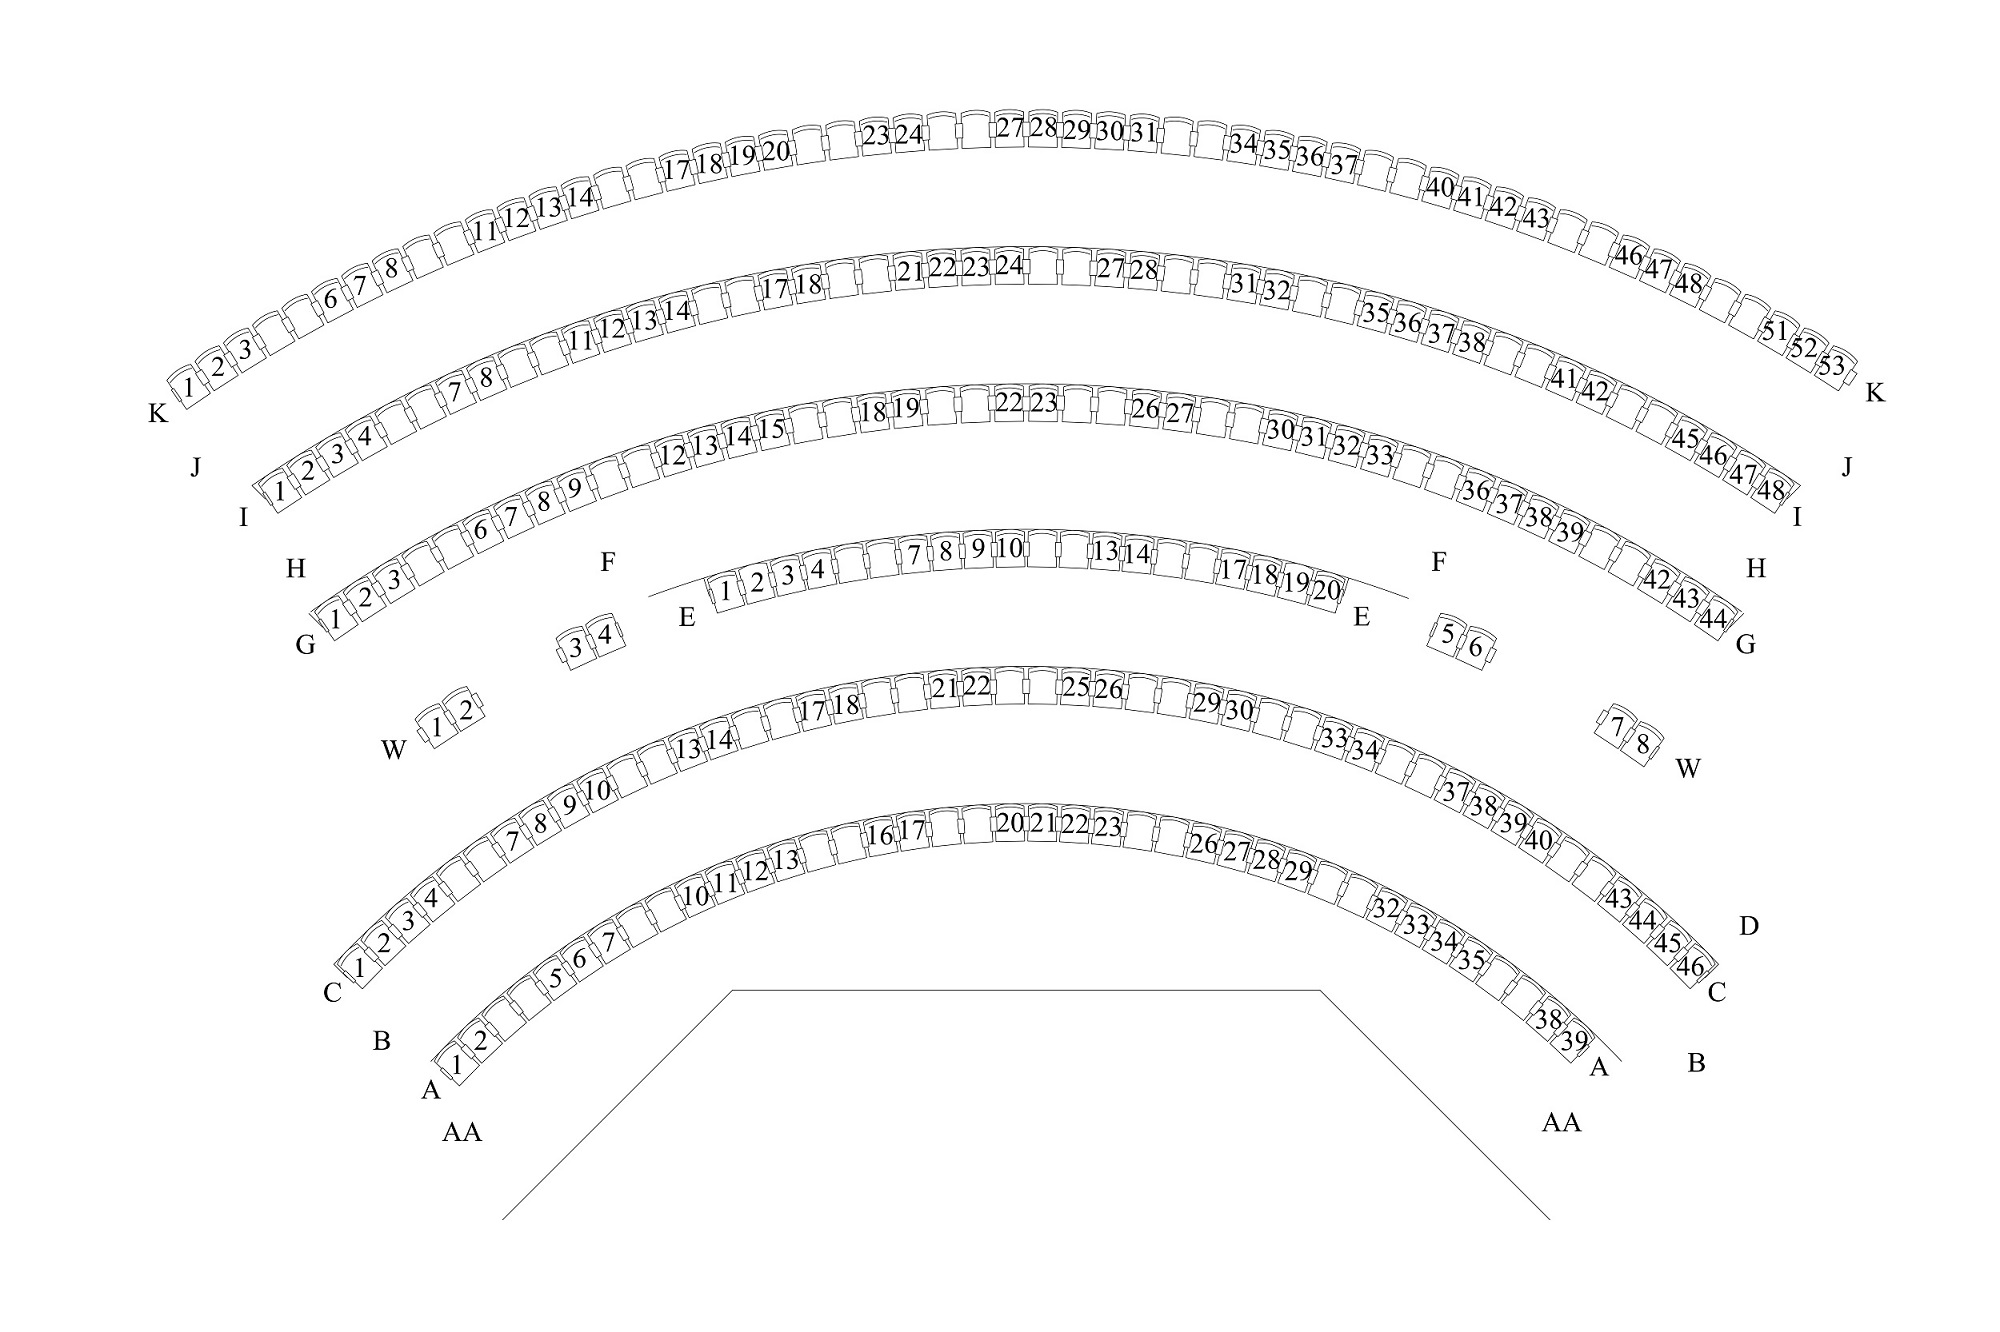 theatre 1 seating chart for COVID